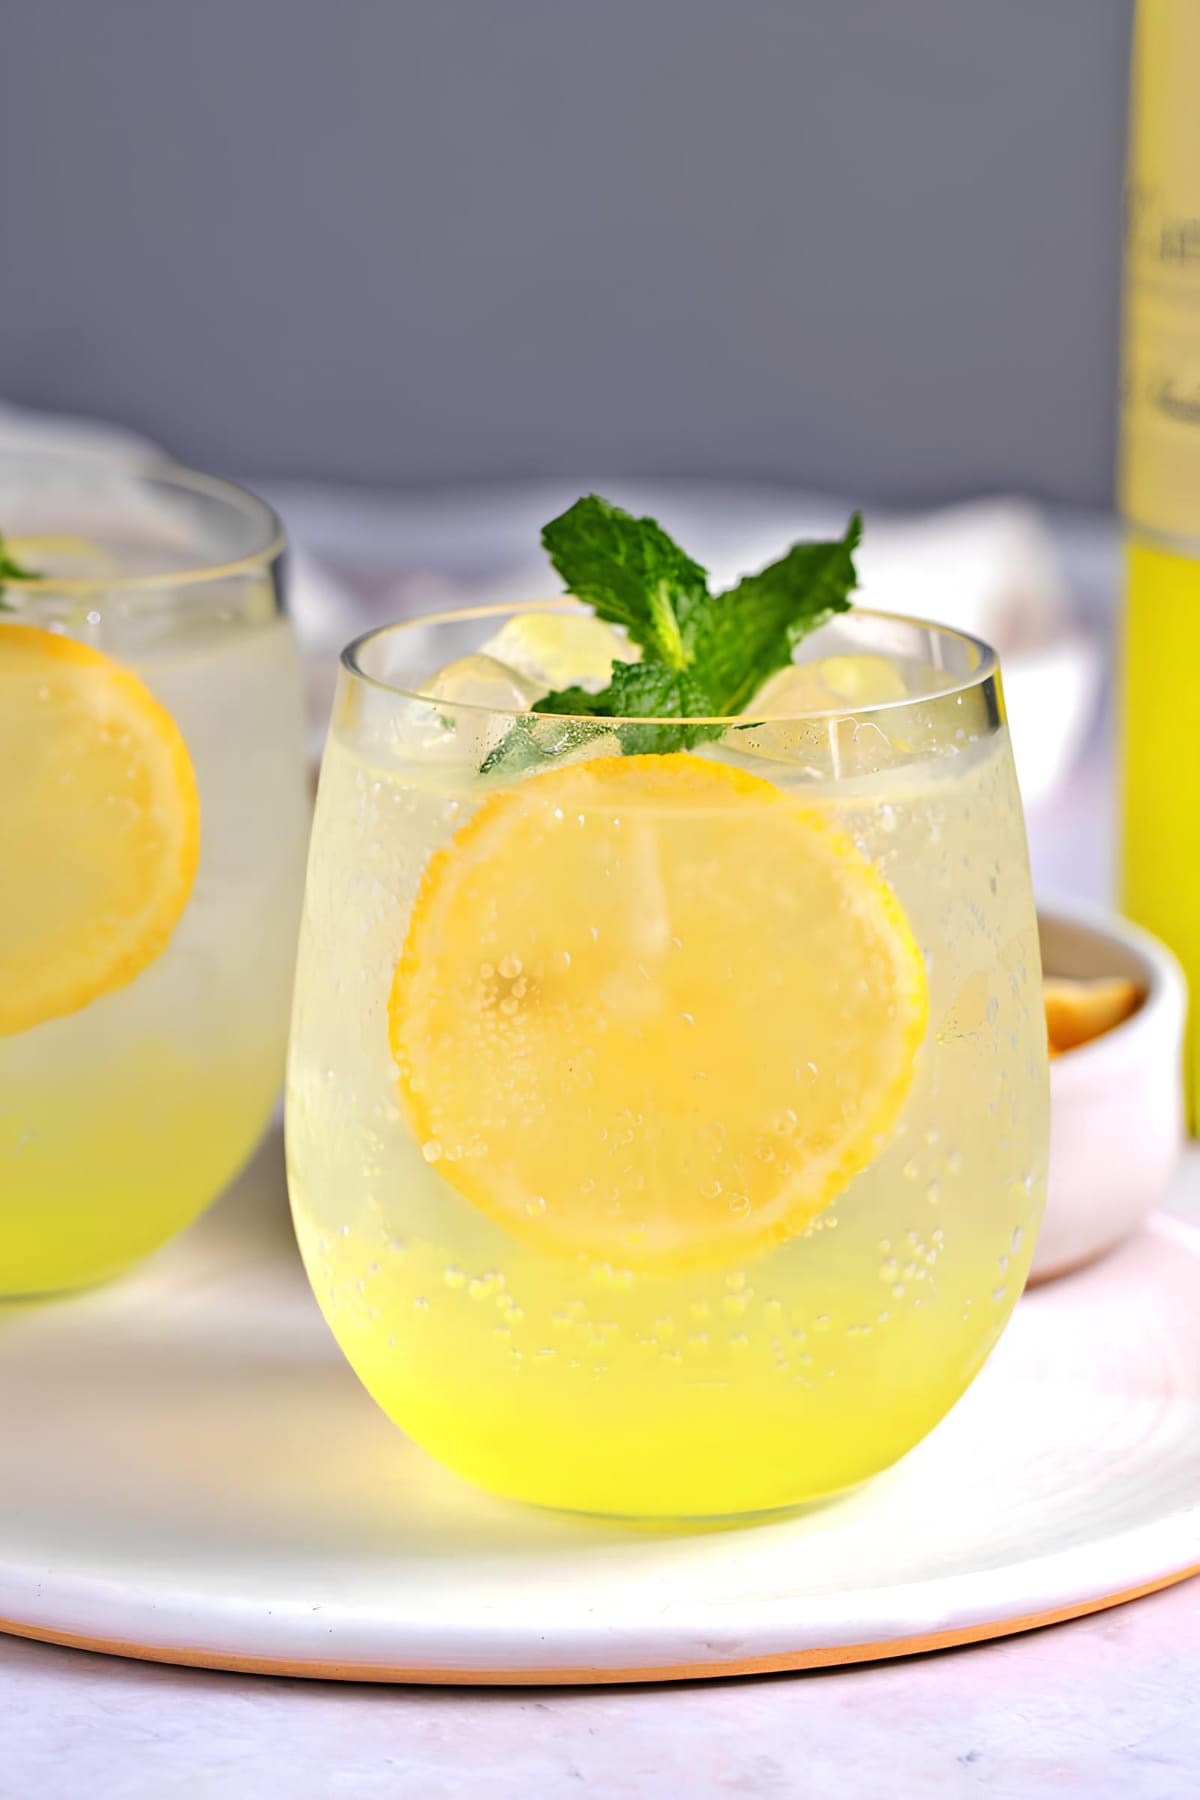 Limoncello spritz cocktail on ice garnished with slices of lemon and fresh mint sprigs served on glasses.